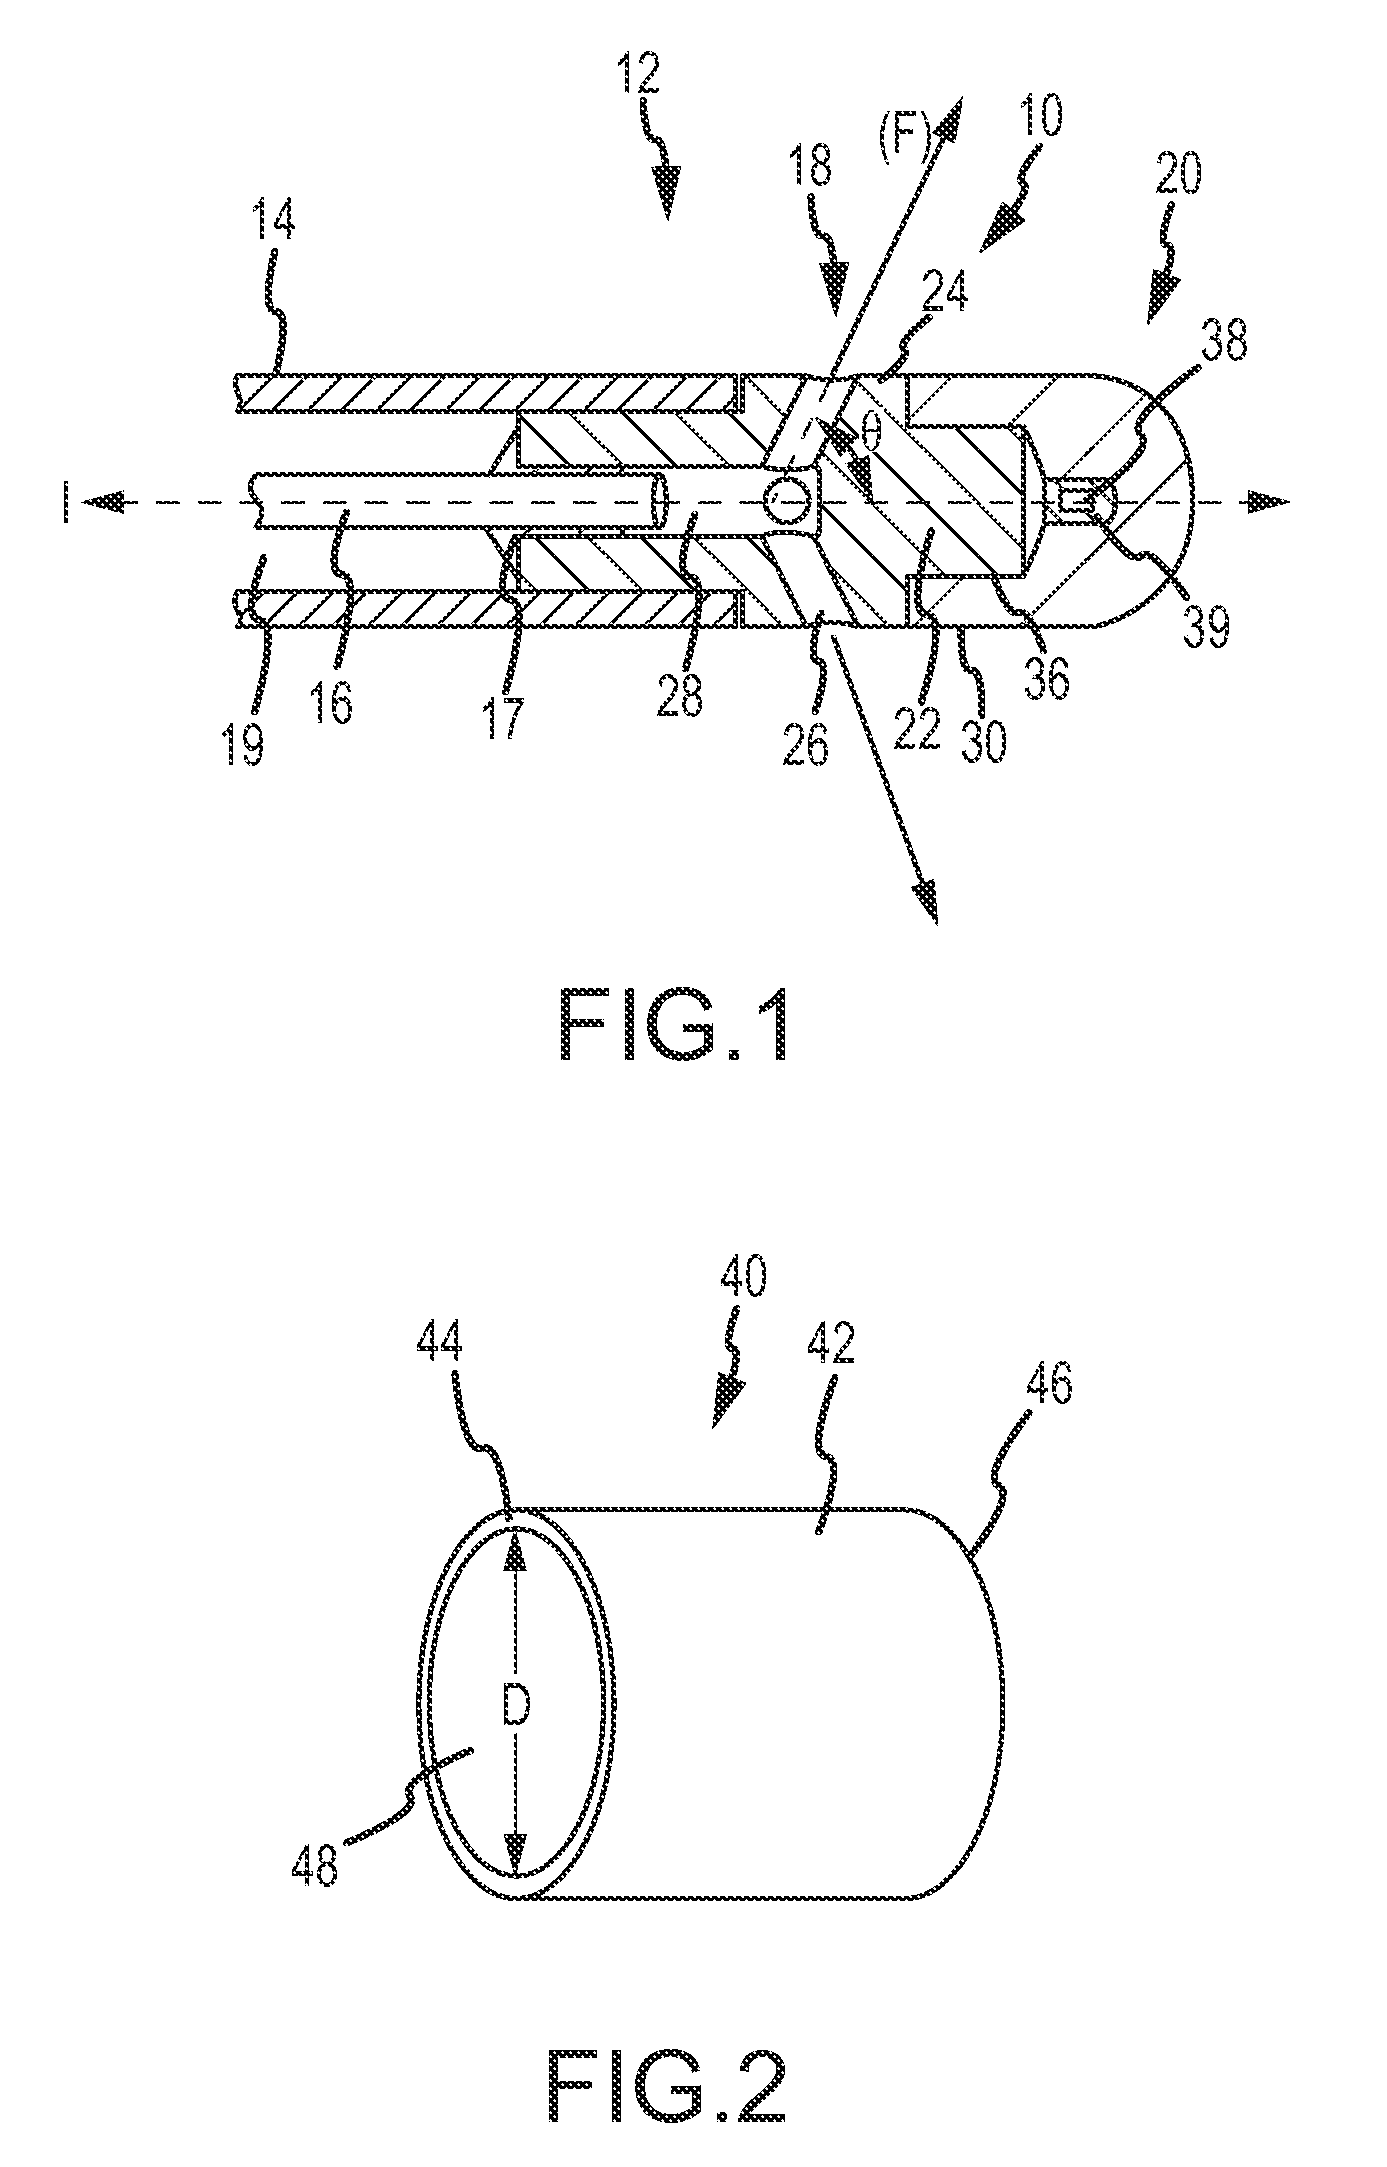 Irrigated ablation catheter assembly having a flow member to create parallel external flow